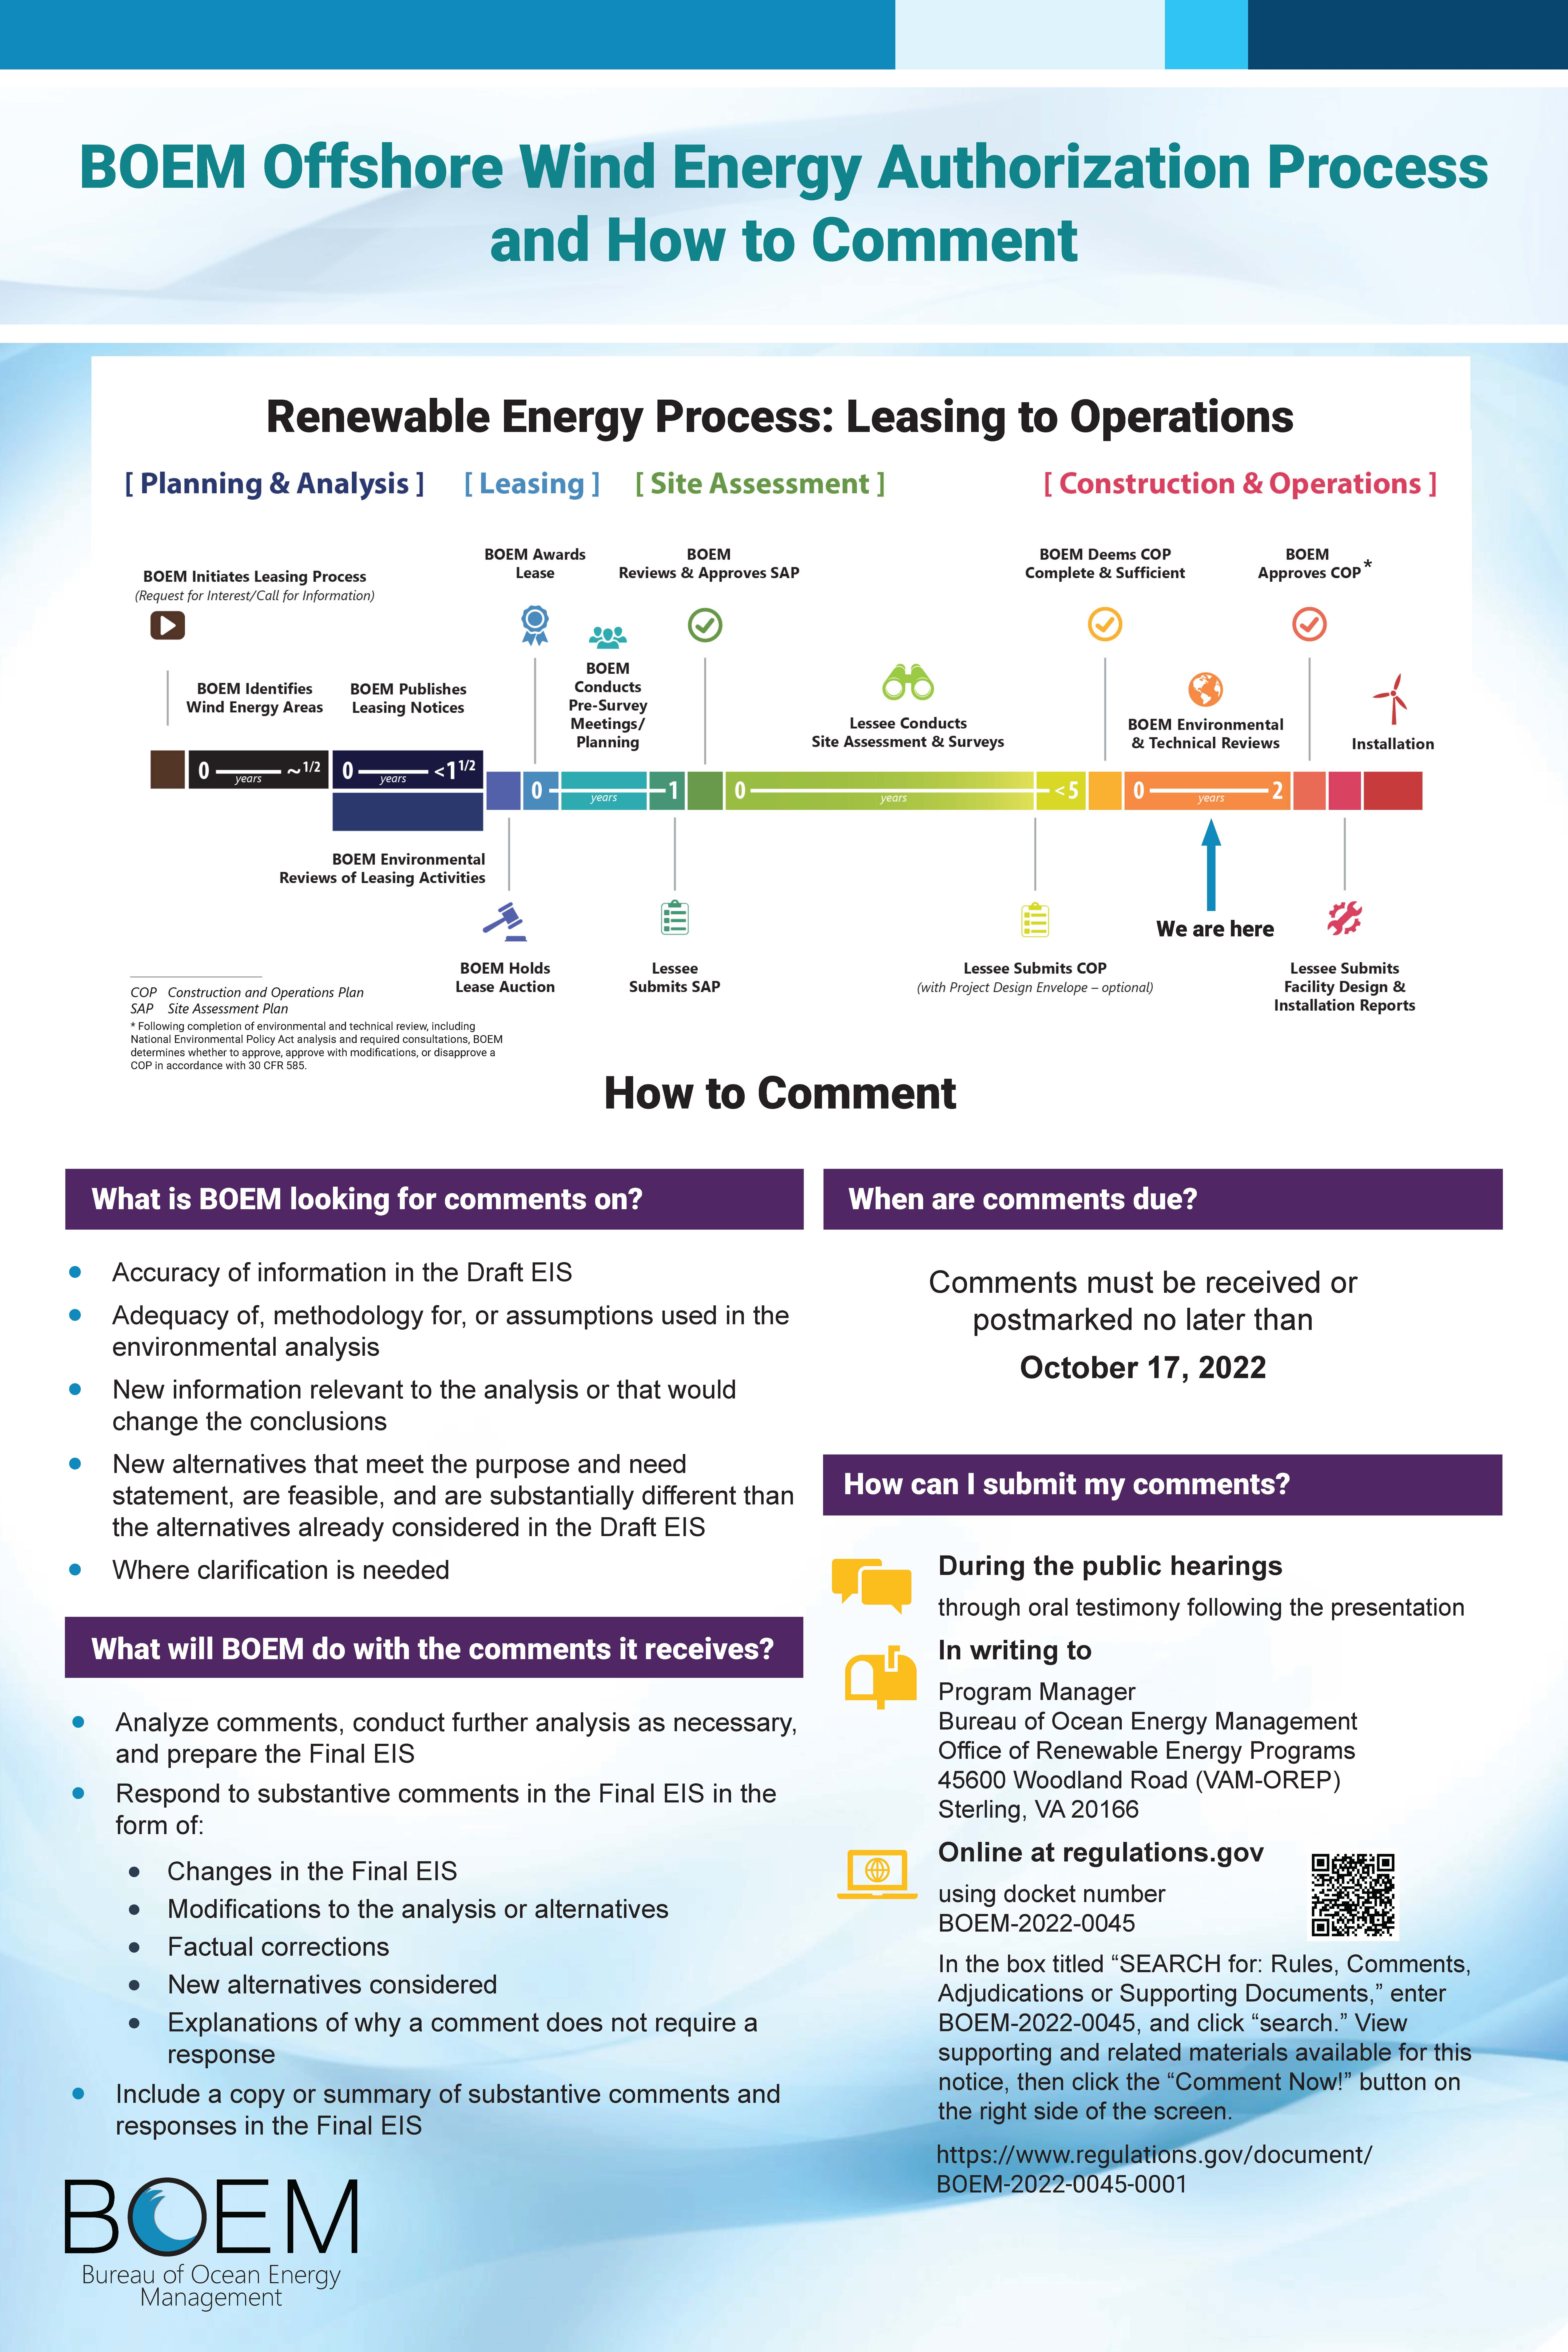 Renewable Energy Process and How to Comment